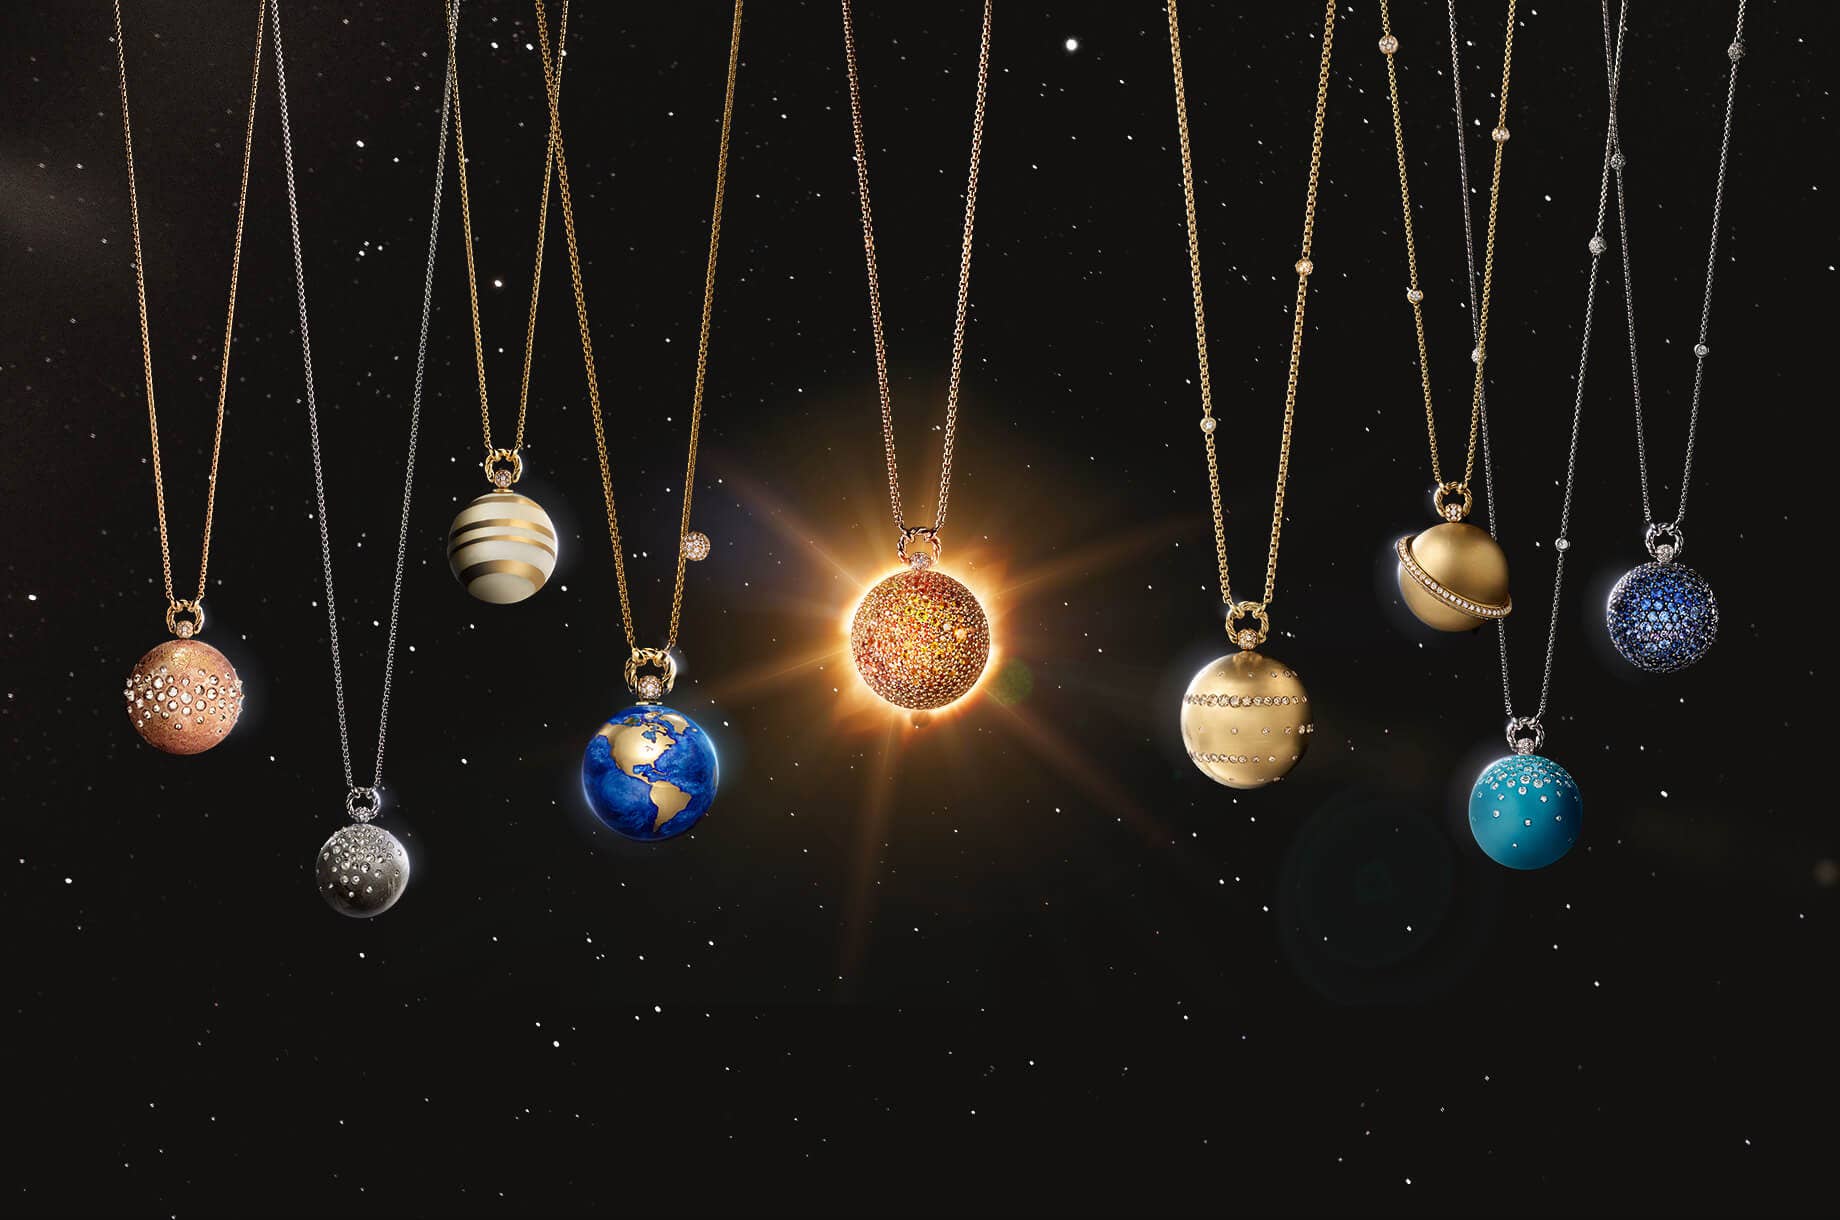 Learn about our solari planets.